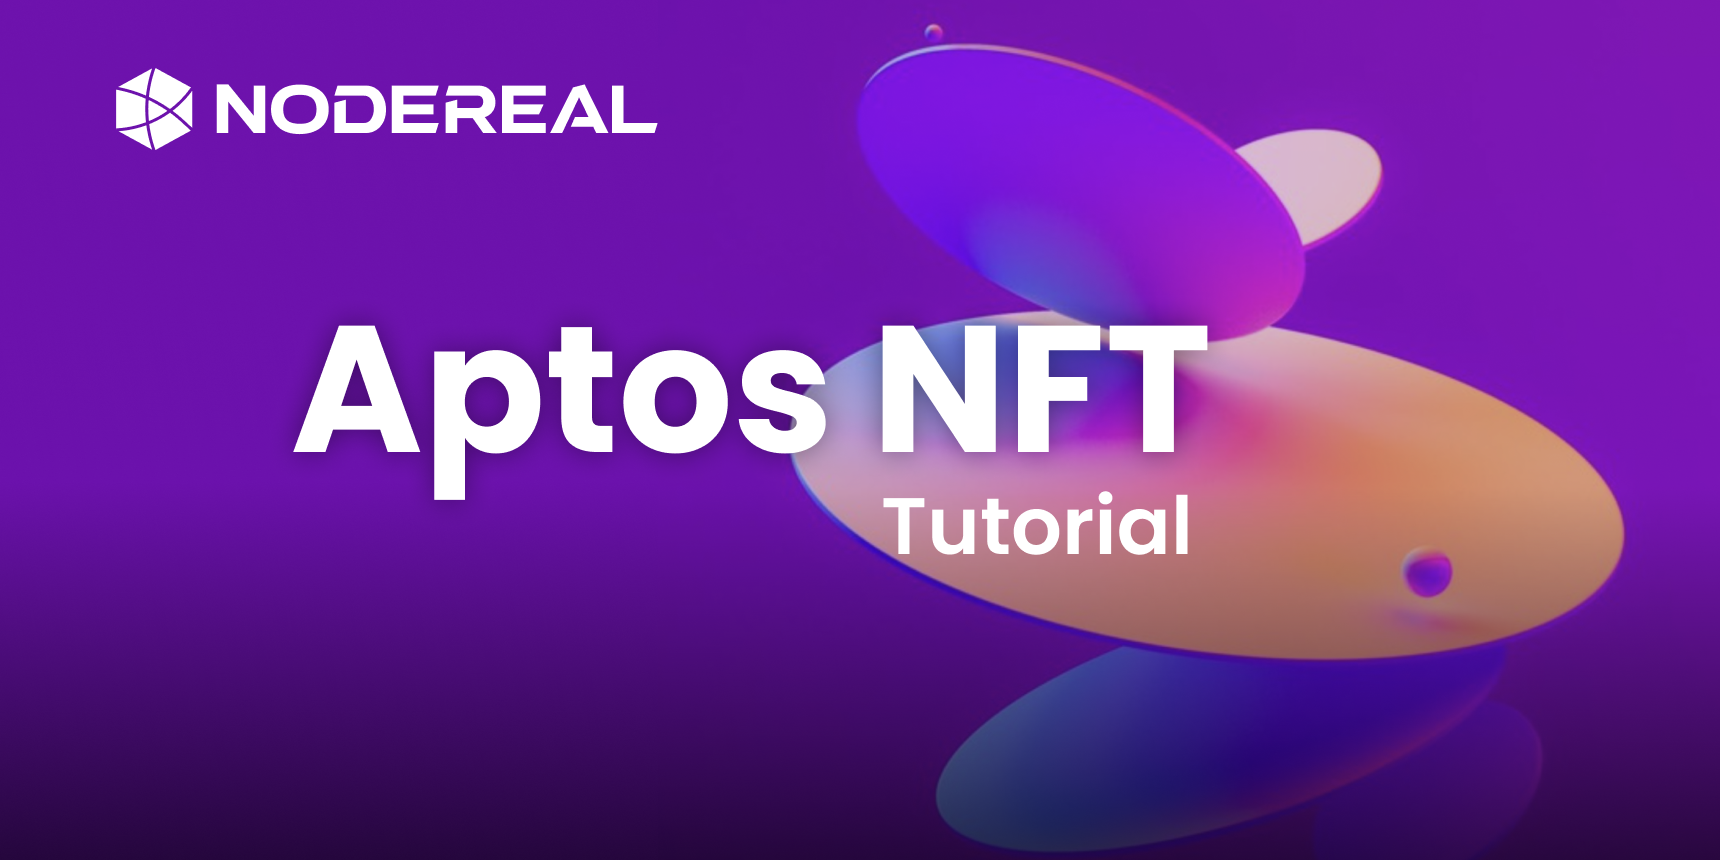 How to Create and Trade NFT in Aptos Network?